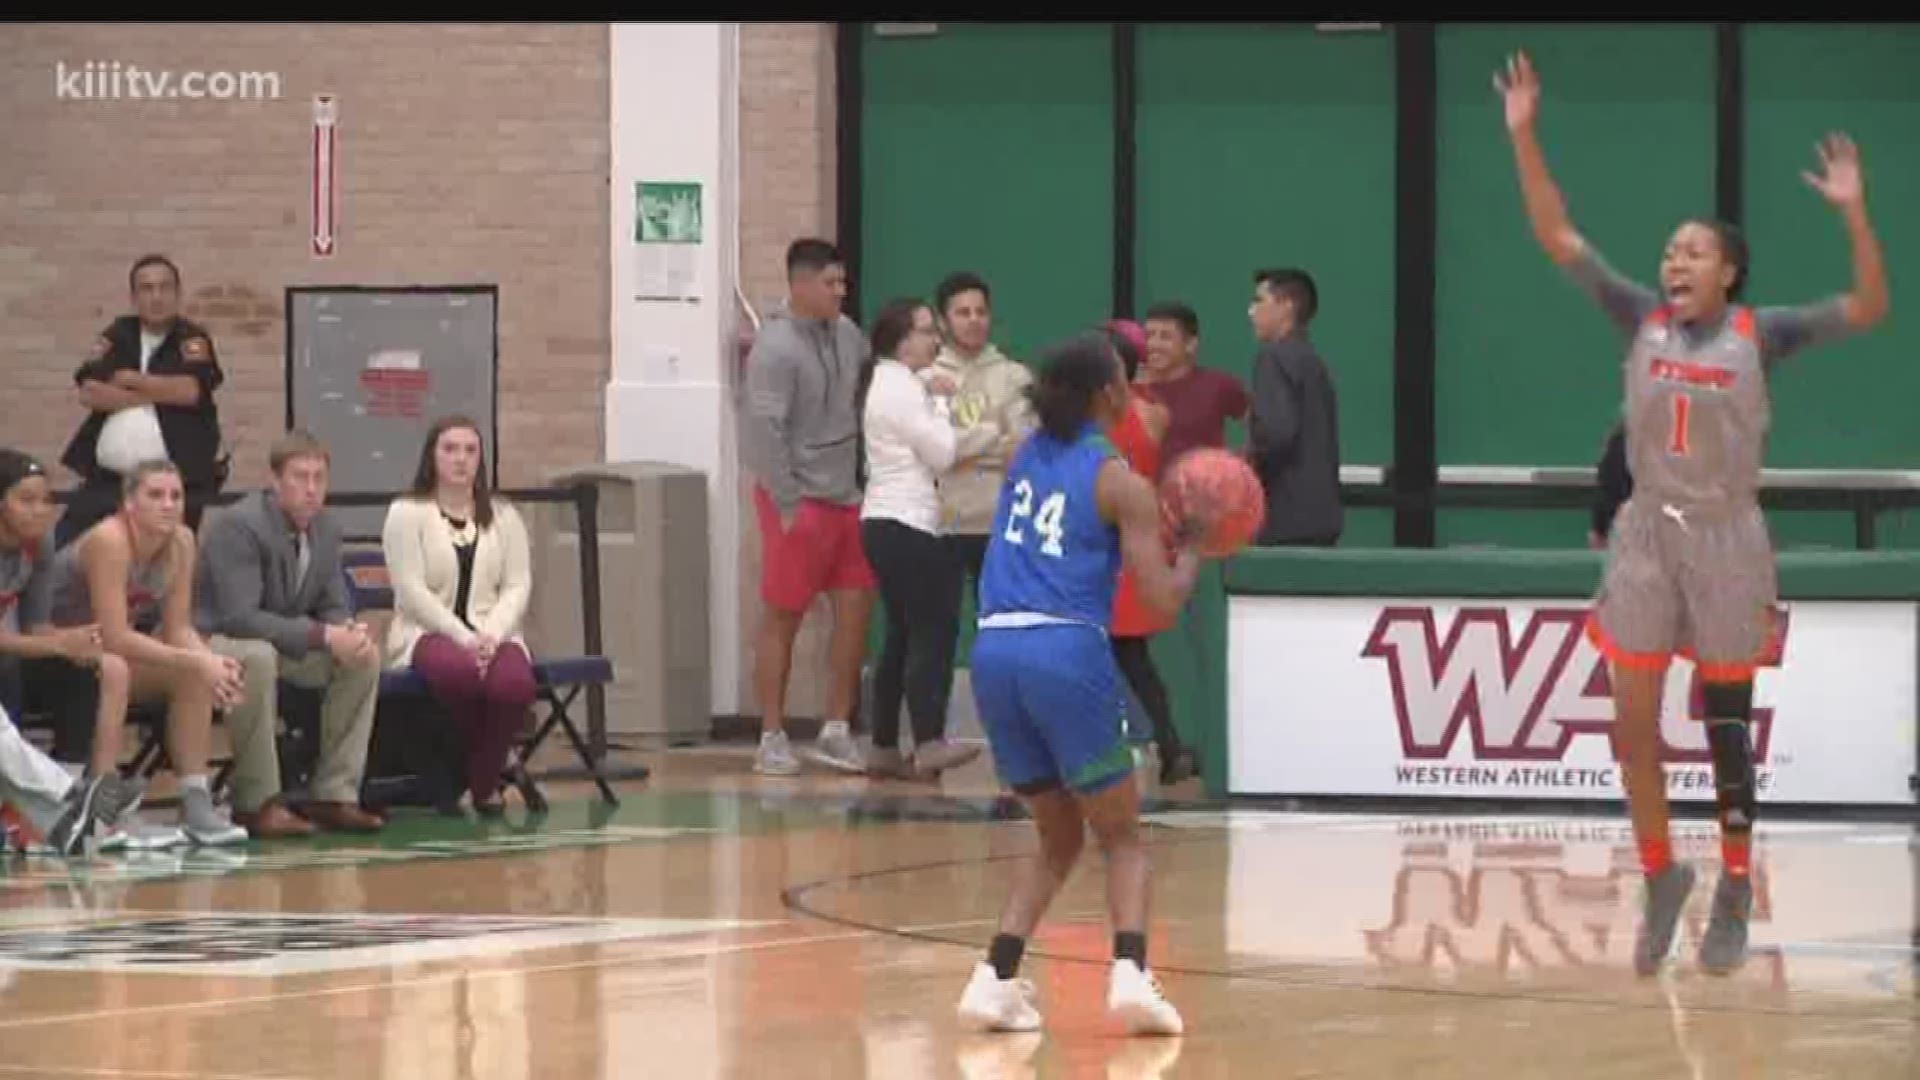 Texas A&M-Corpus Christi Women's basketball remained undefeated on the season with a 59-49 win over UTRGV.